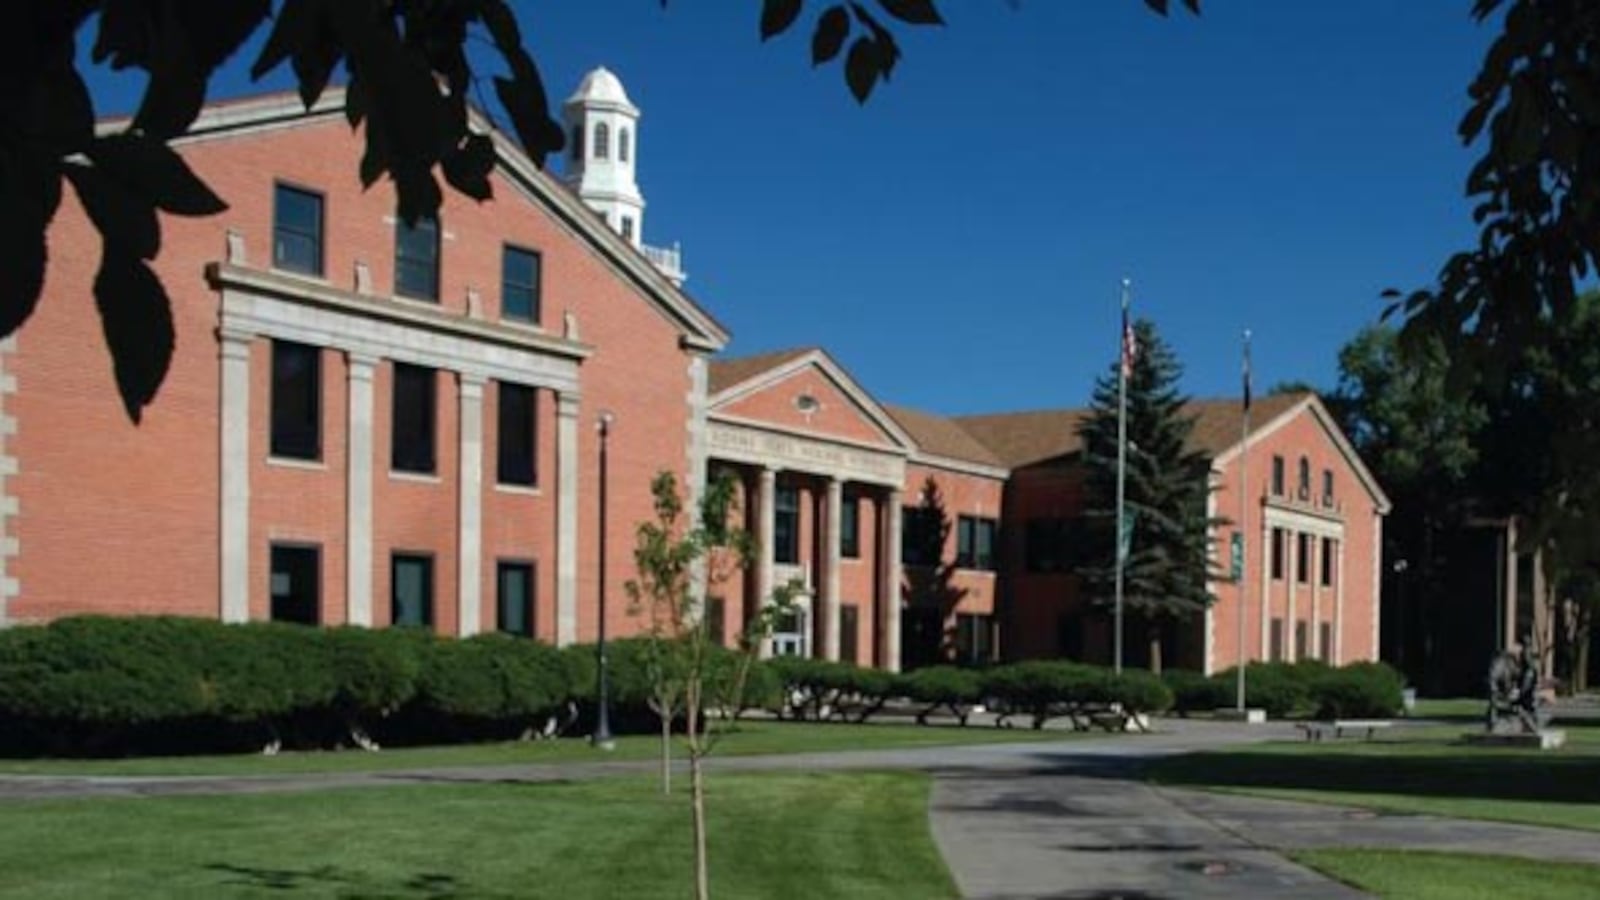 Campus of Adams State University in Alamosa